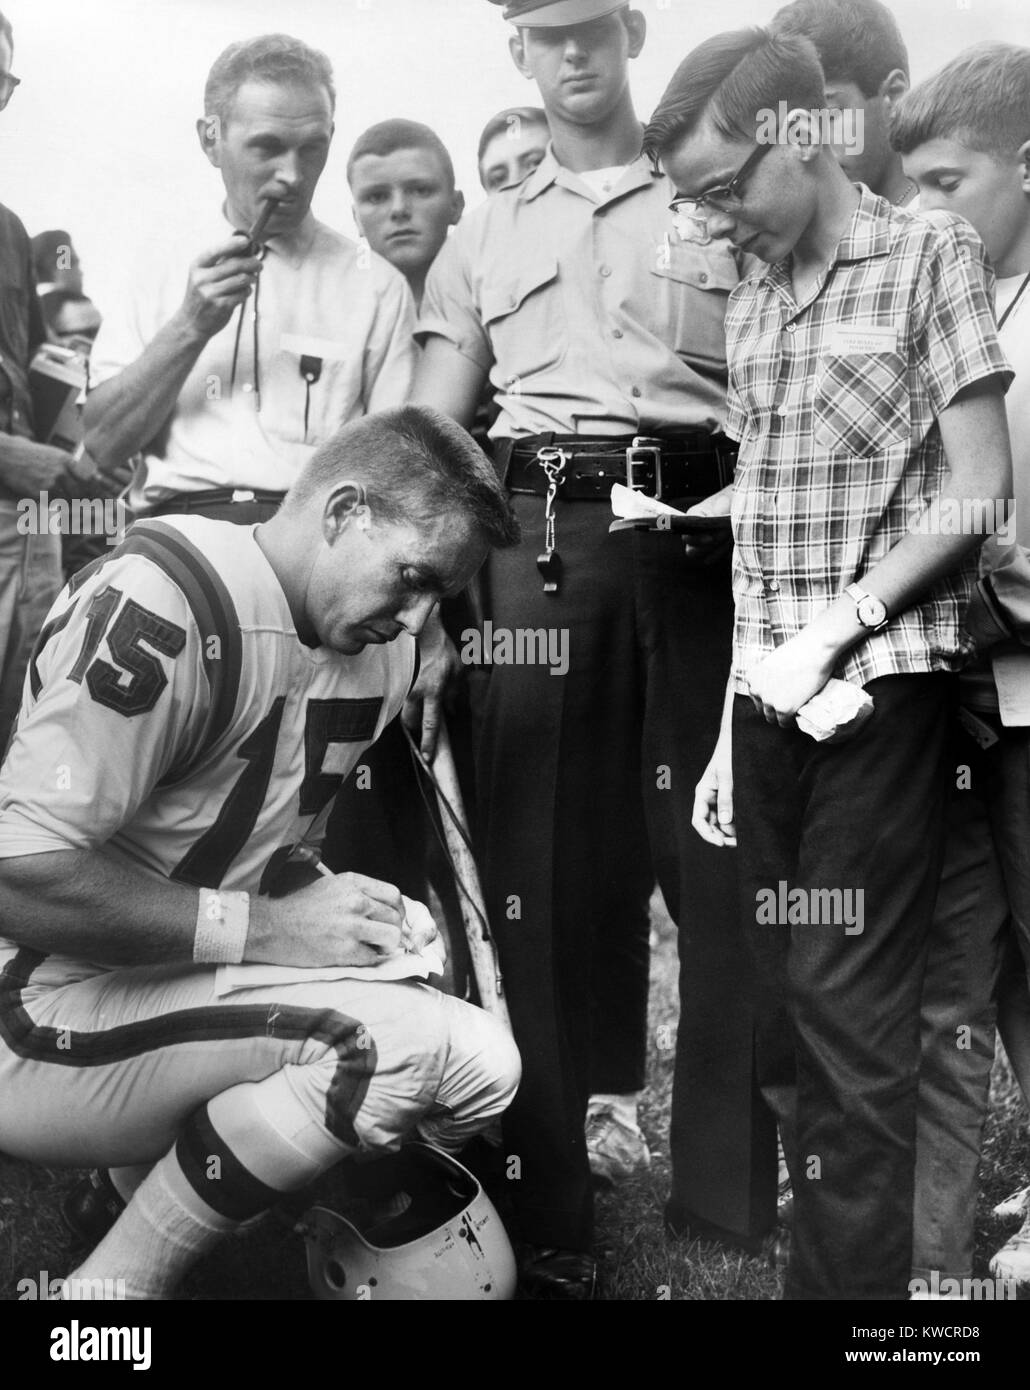 Buffalo Bills player Jack Kemp signs his autograph for a boy on August 4, 1964. Kemp played professional football from 1957 to 1969. In 1970 he successfully ran for Congress and was reelected for 10 terms. In 1989 he was Secretary of Housing and Urban Development in the George H.W. Bush administration from 1989-92. - (BSLOC 2015 1 114) Stock Photo